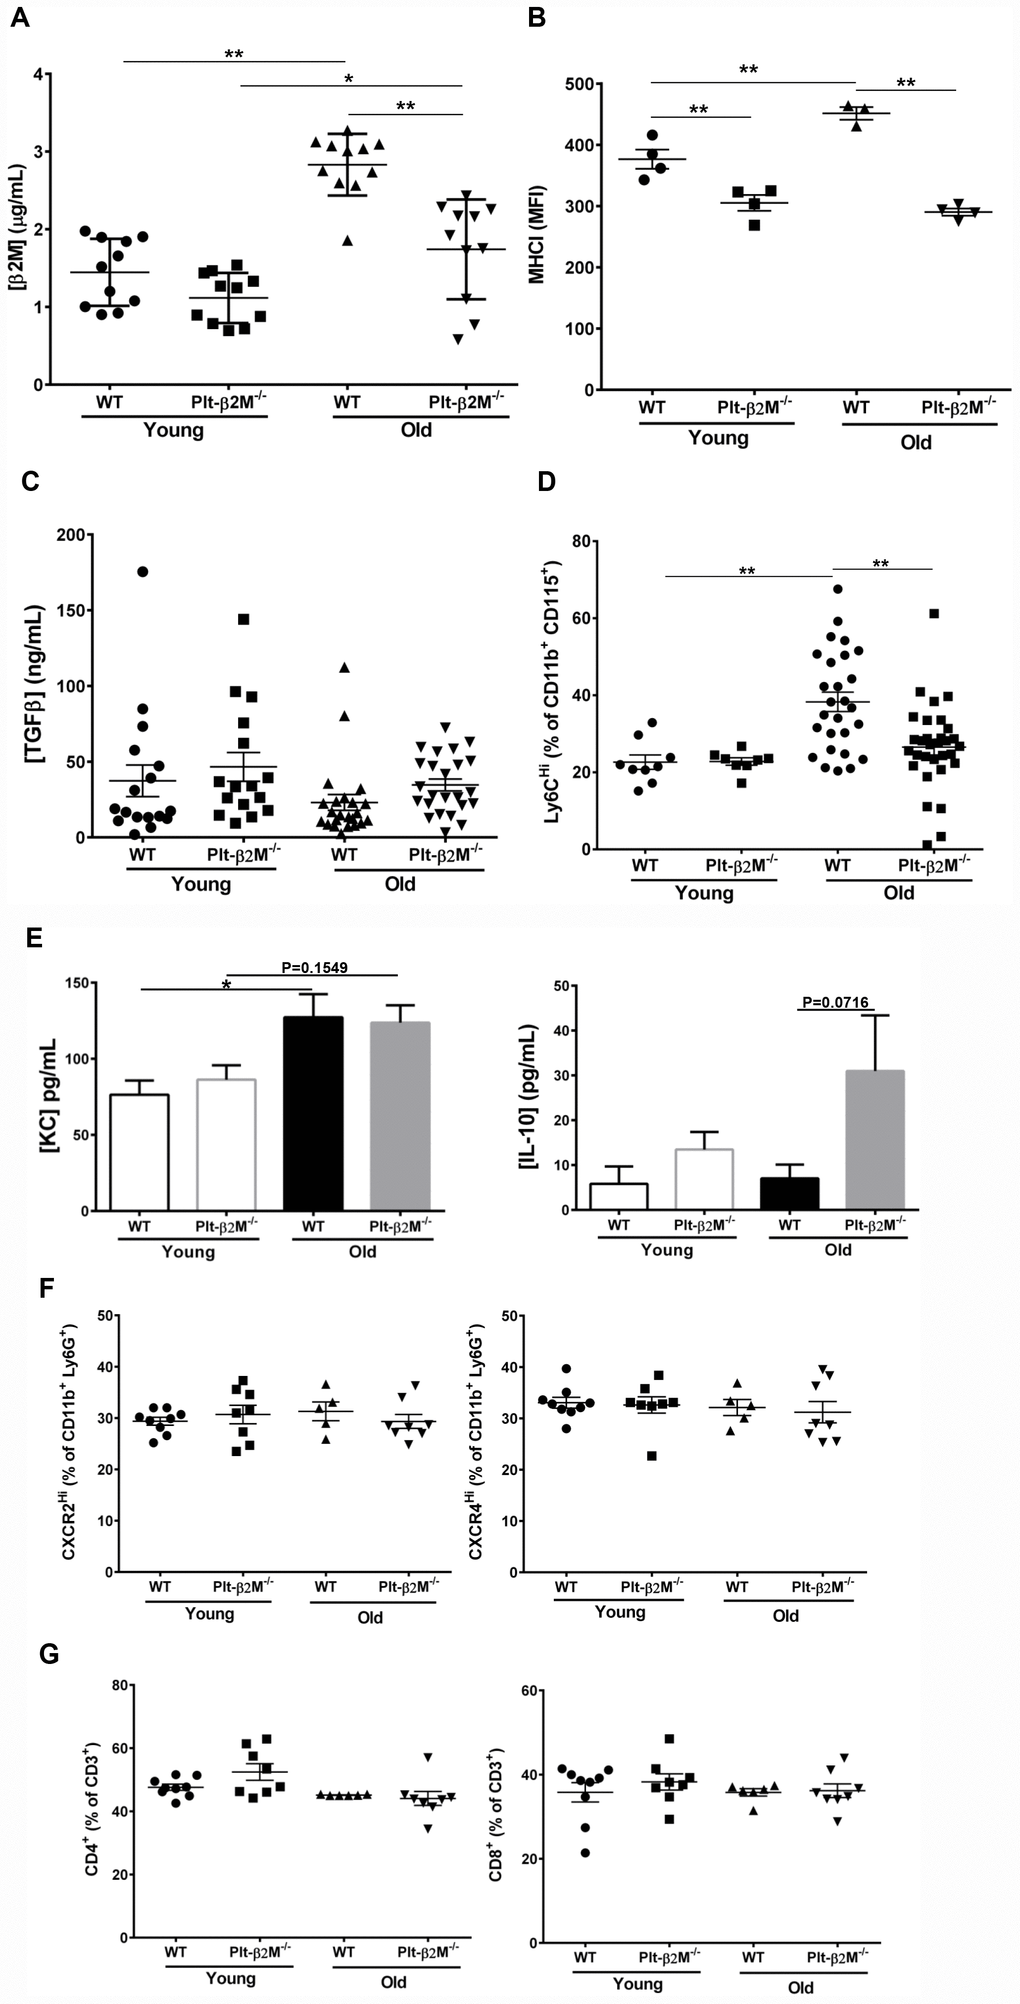 A lack of platelet-derived β2M changes age associated monocyte phenotypes. (A) Platelets are a major source of age associated increases in plasma β2M. Plasma was isolated from 2-4 and 14-16 mos old WT and Plt-β2M-/- mice and β2M was quantified by ELISA. Plasma β2M had a greater increase with age in WT compared to Plt-β2M-/- mice (N=11, mean ± SEM, *PB) Platelet MHC I increased with age. Platelets were isolated from 4 and 14 mos old WT and Plt-β2M-/- mice. Surface MHC I was quantified by flow cytometry. MHC I increased with age in WT, but not Plt-β2M-/- mice (N=3-4, mean ± SEM, **PC) Plasma TGFβ does not significantly change with age in either WT or Plt-β2M-/- mice. Plasma TGFβ was quantified by ELISA (N=17-24, mean ± SEM, one-way ANOVA with Bonferroni correction). (D) Aged Plt-β2M-/- mice had fewer circulating Ly6CHi monocytes compared to WT mice. Peripheral blood was isolated from 4 mos and 14 mos old WT and Plt-β2M-/- mice and monocyte Ly6C expression determined by flow cytometry. Ly6CHi monocytes were increased in older WT, but not Plt-β2M-/- mice (N=8-31, mean ± SEM, **PE) 14 mos old WT mice have increased plasma KC while Plt-β2M-/- have increased plasma IL-10 (N=16-22, mean ± SEM, one-way ANOVA with Bonferroni correction). (F) 14 mos old WT and Plt-β2M-/- mice had similar circulating neutrophils. Peripheral blood was isolated from 4 mos and 14 mos old WT and Plt-β2M-/- mice and CXCR2Hi and CXCR4Hi neutrophils were quantified by flow cytometry (N=5-9, mean ± SEM, one-way ANOVA with Bonferroni correction). (G) 14 mos old WT and Plt-β2M-/- mice have similar numbers of circulating T cells. Peripheral blood was isolated from 4 mos and 14 mos old WT and Plt-β2M-/- mice and CD4 and CD8 T cells quantified by flow cytometry (N=6-9, mean ± SEM, one-way ANOVA with Bonferroni correction).